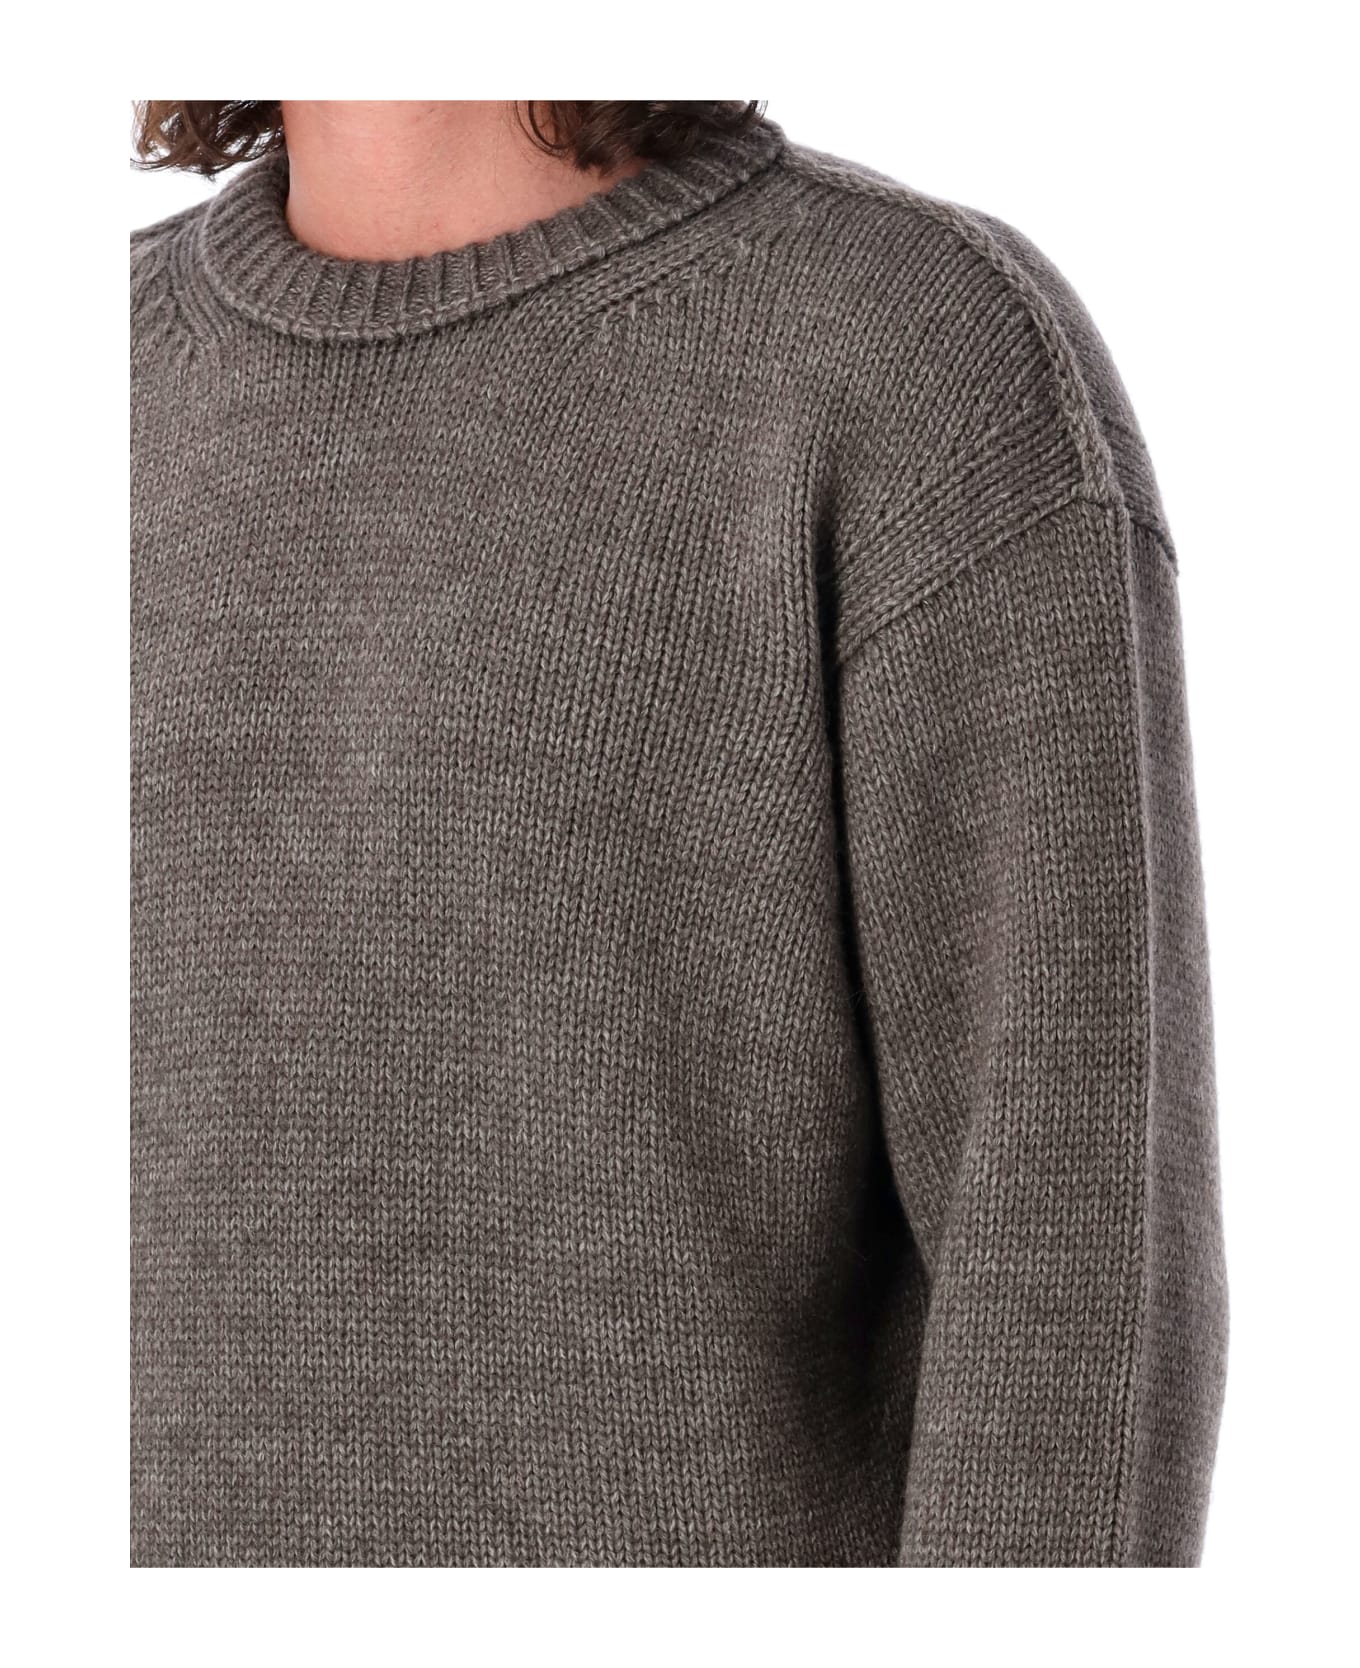 Lemaire Boxy Sweater - Grey